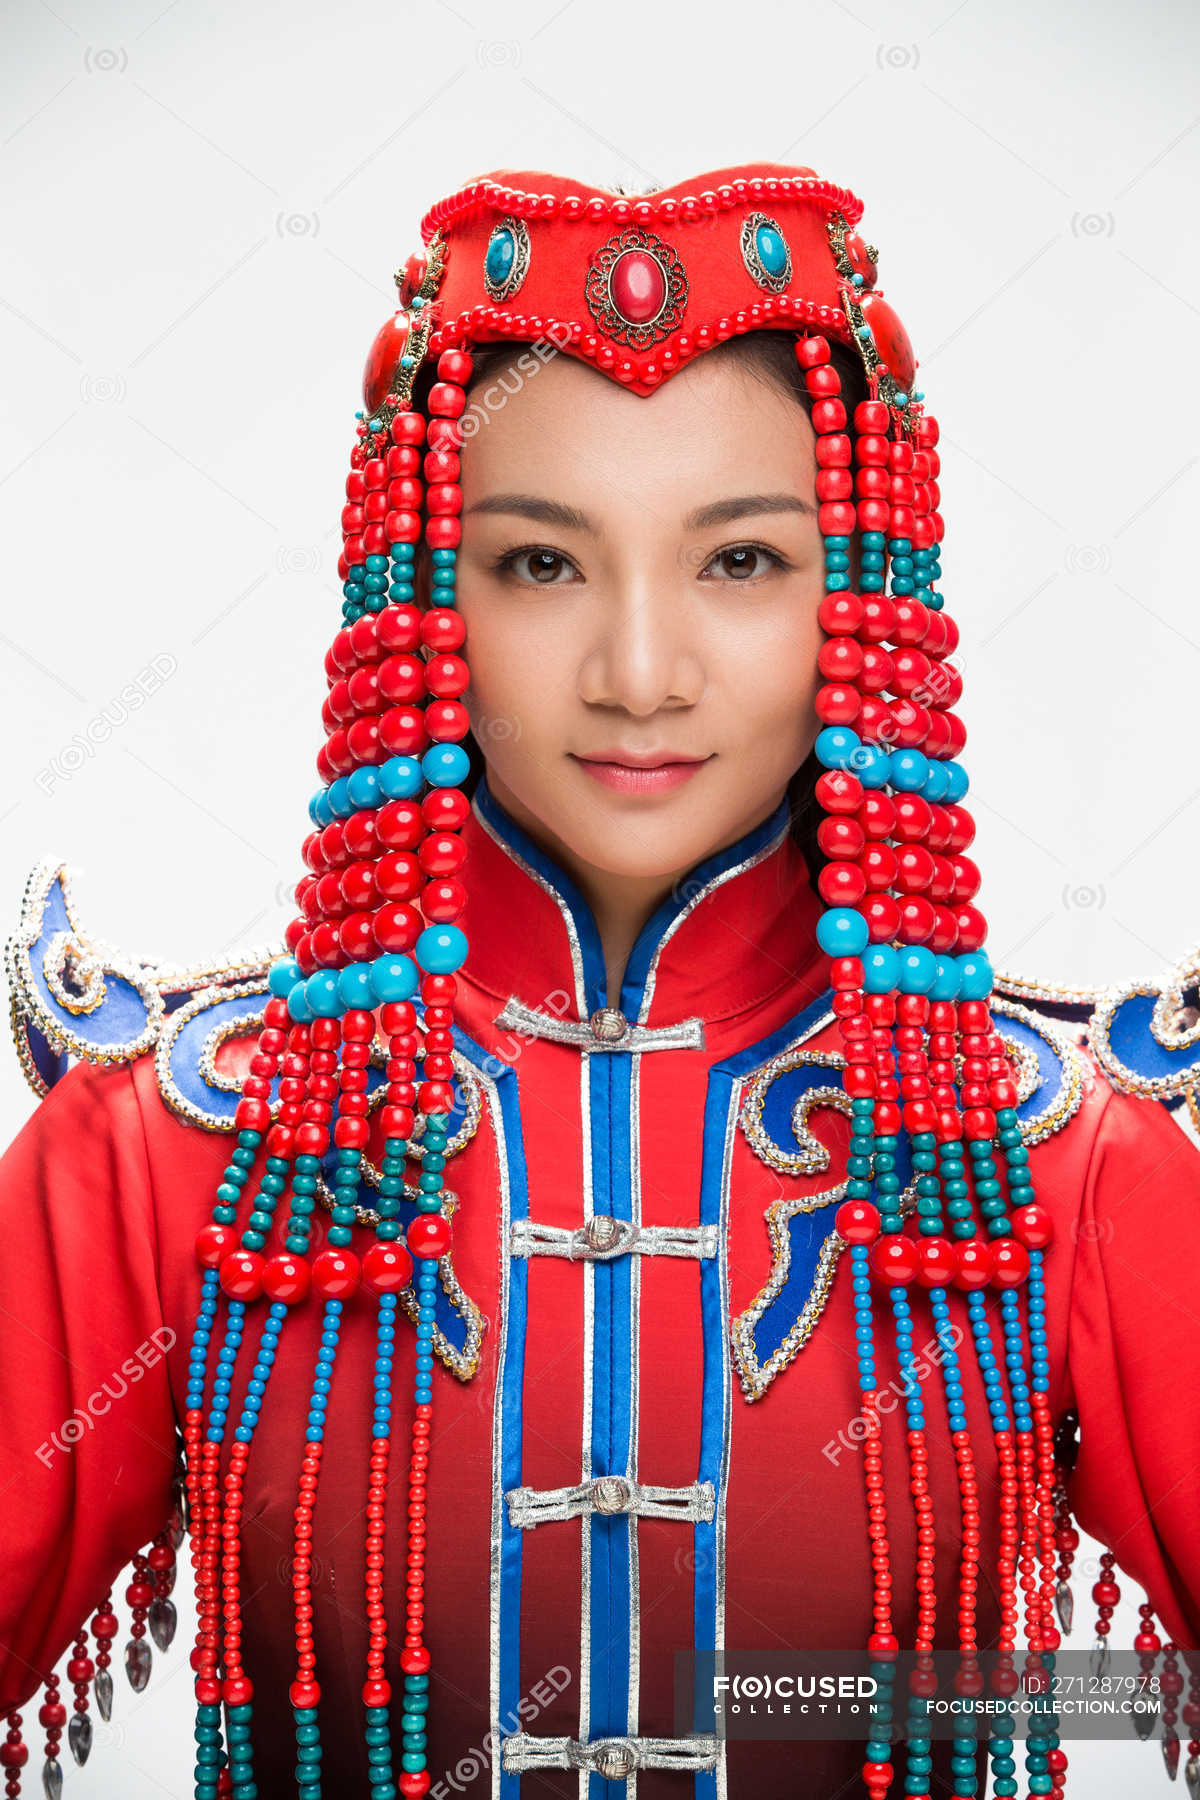 https://st.focusedcollection.com/23619988/i/1800/focused_271287978-stock-photo-beautiful-young-woman-mongolian-costume.jpg